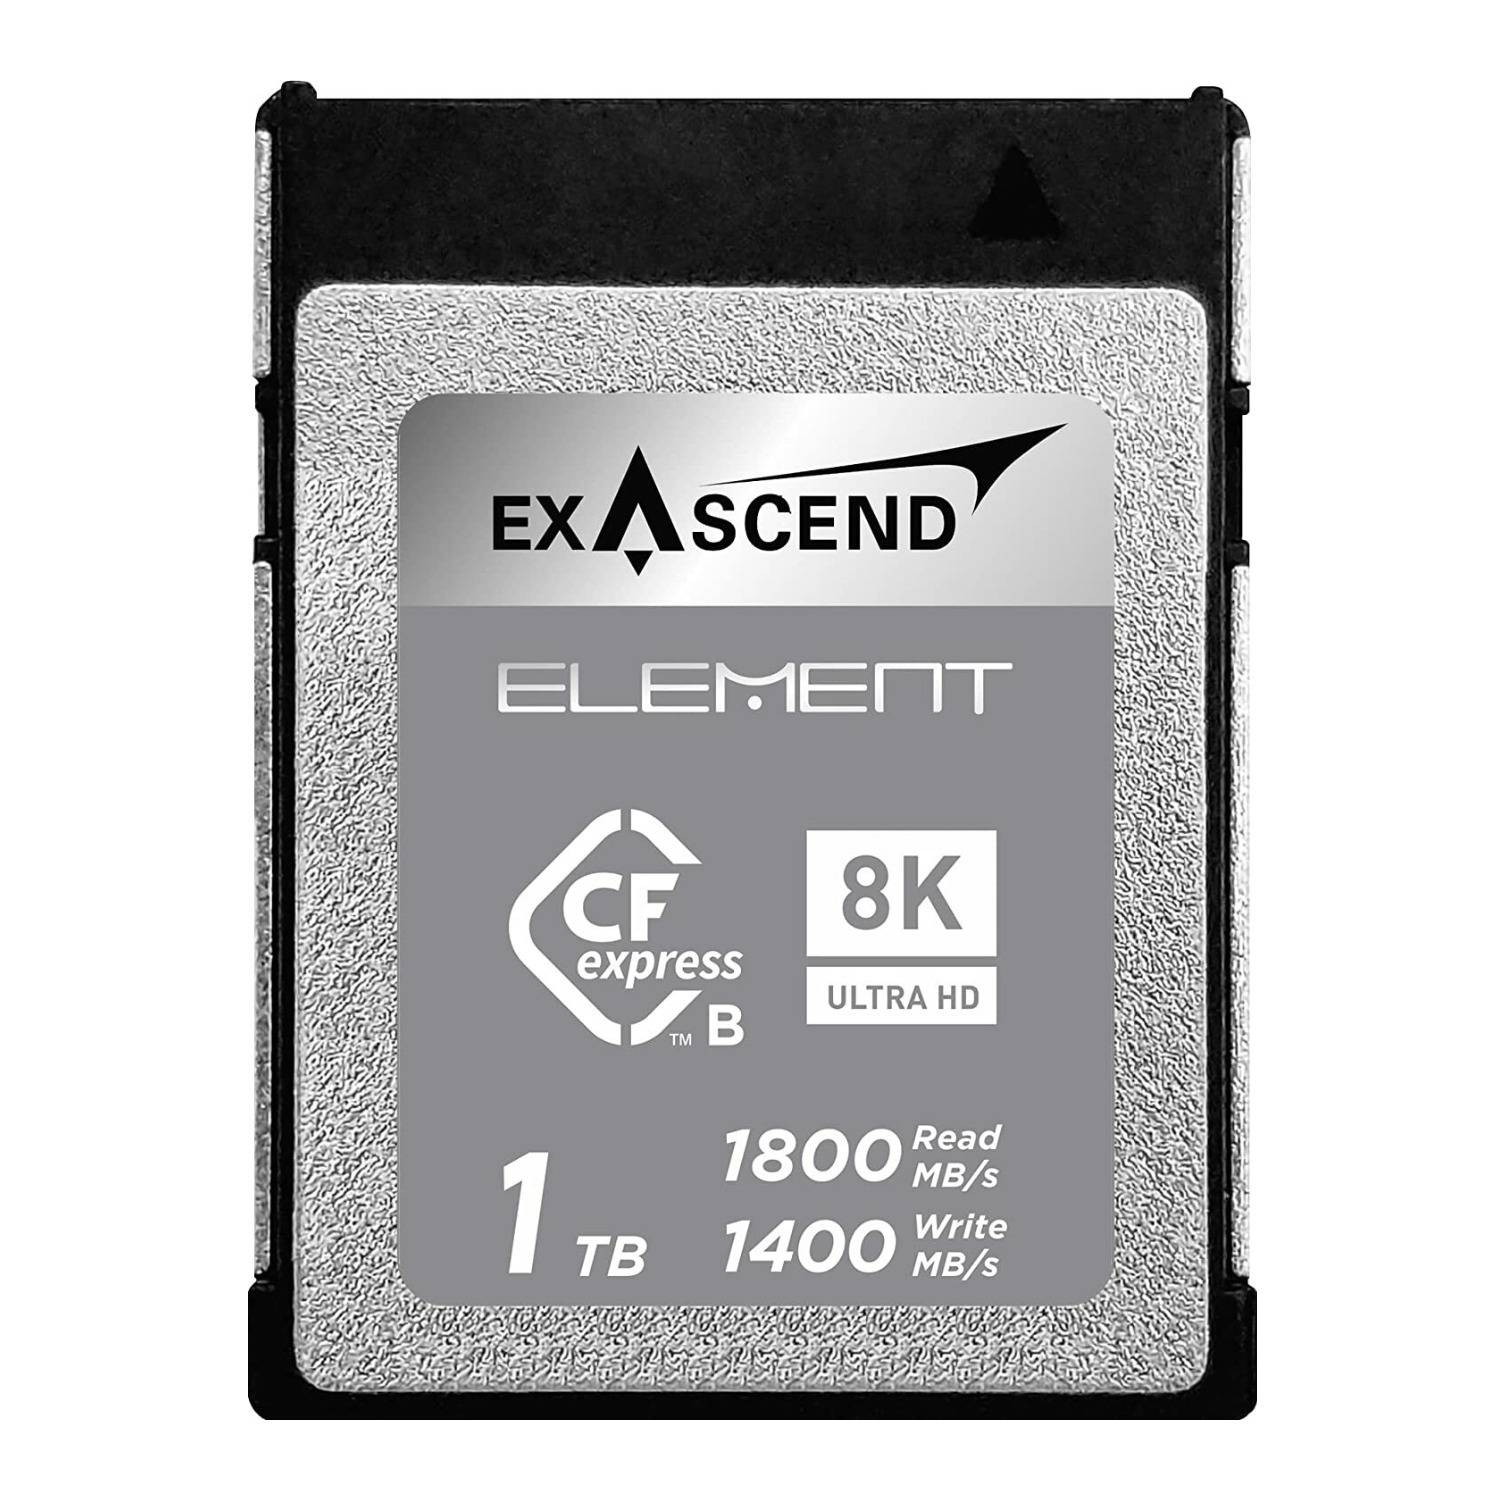 Exascend 1TB Element CFexpress Card Type-B Sustained Read 1800MB/s